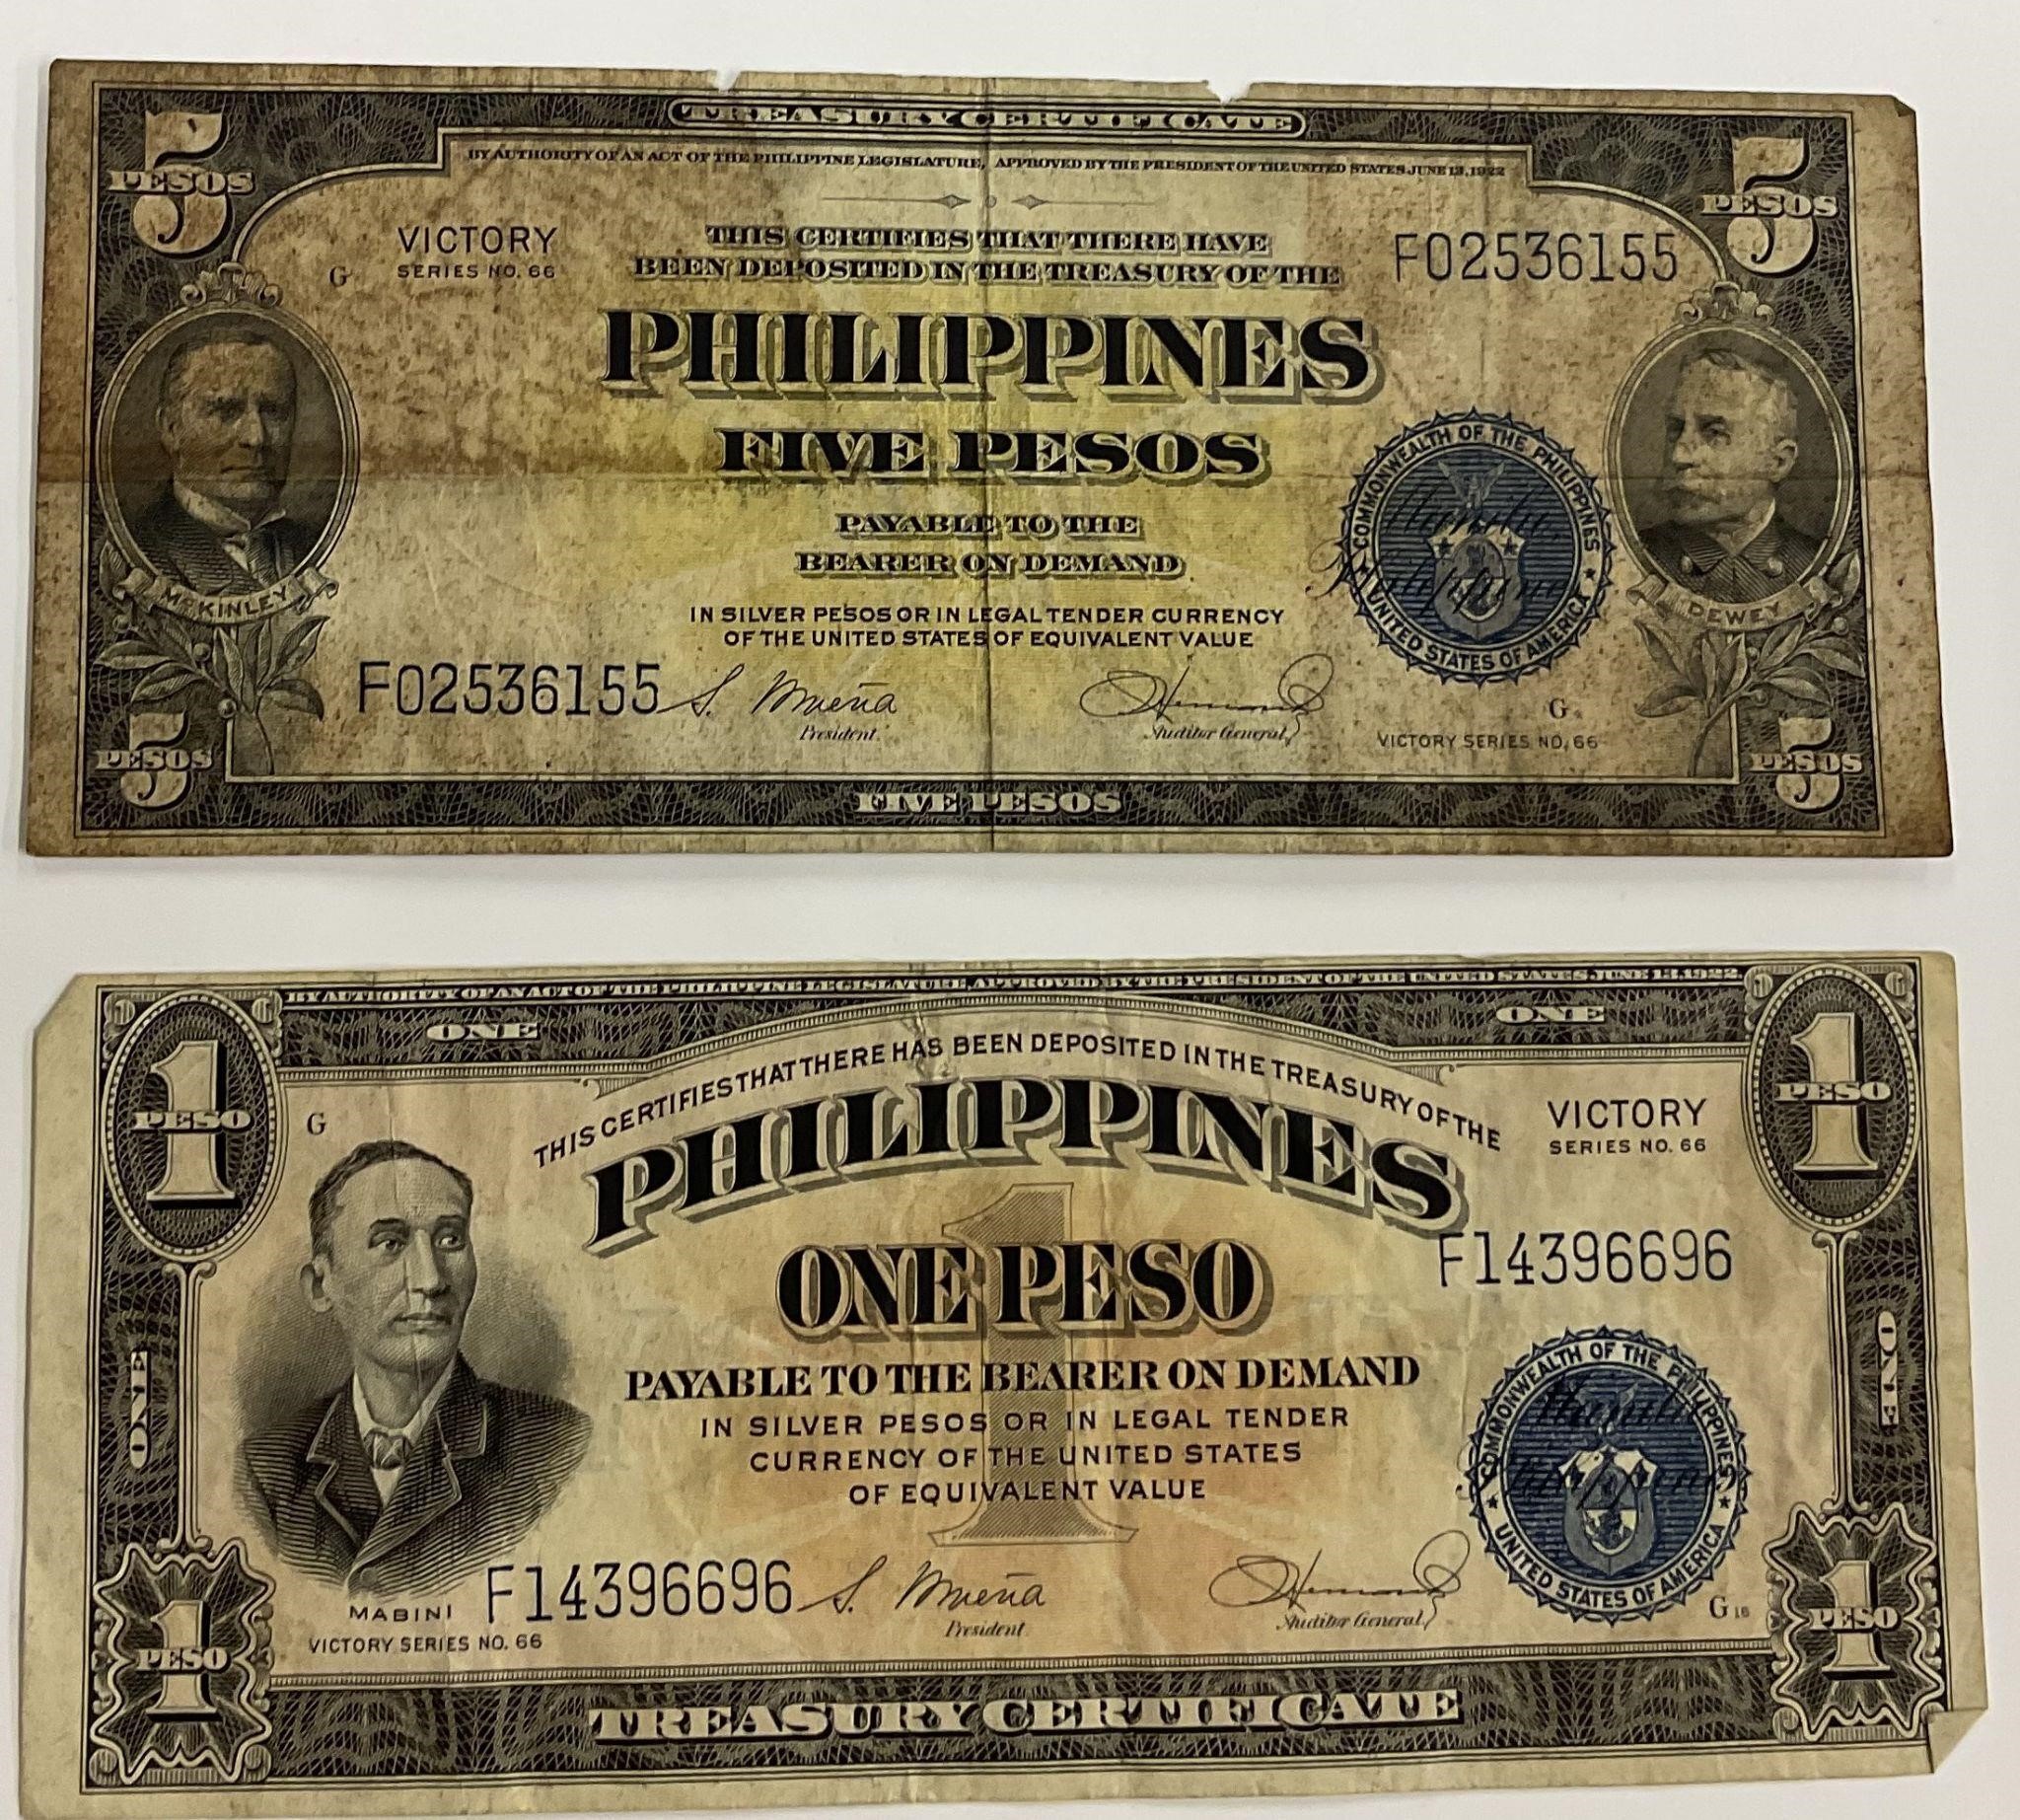 1922 VICTORY PHILIPPINES PESOS BILLS CURRENCY